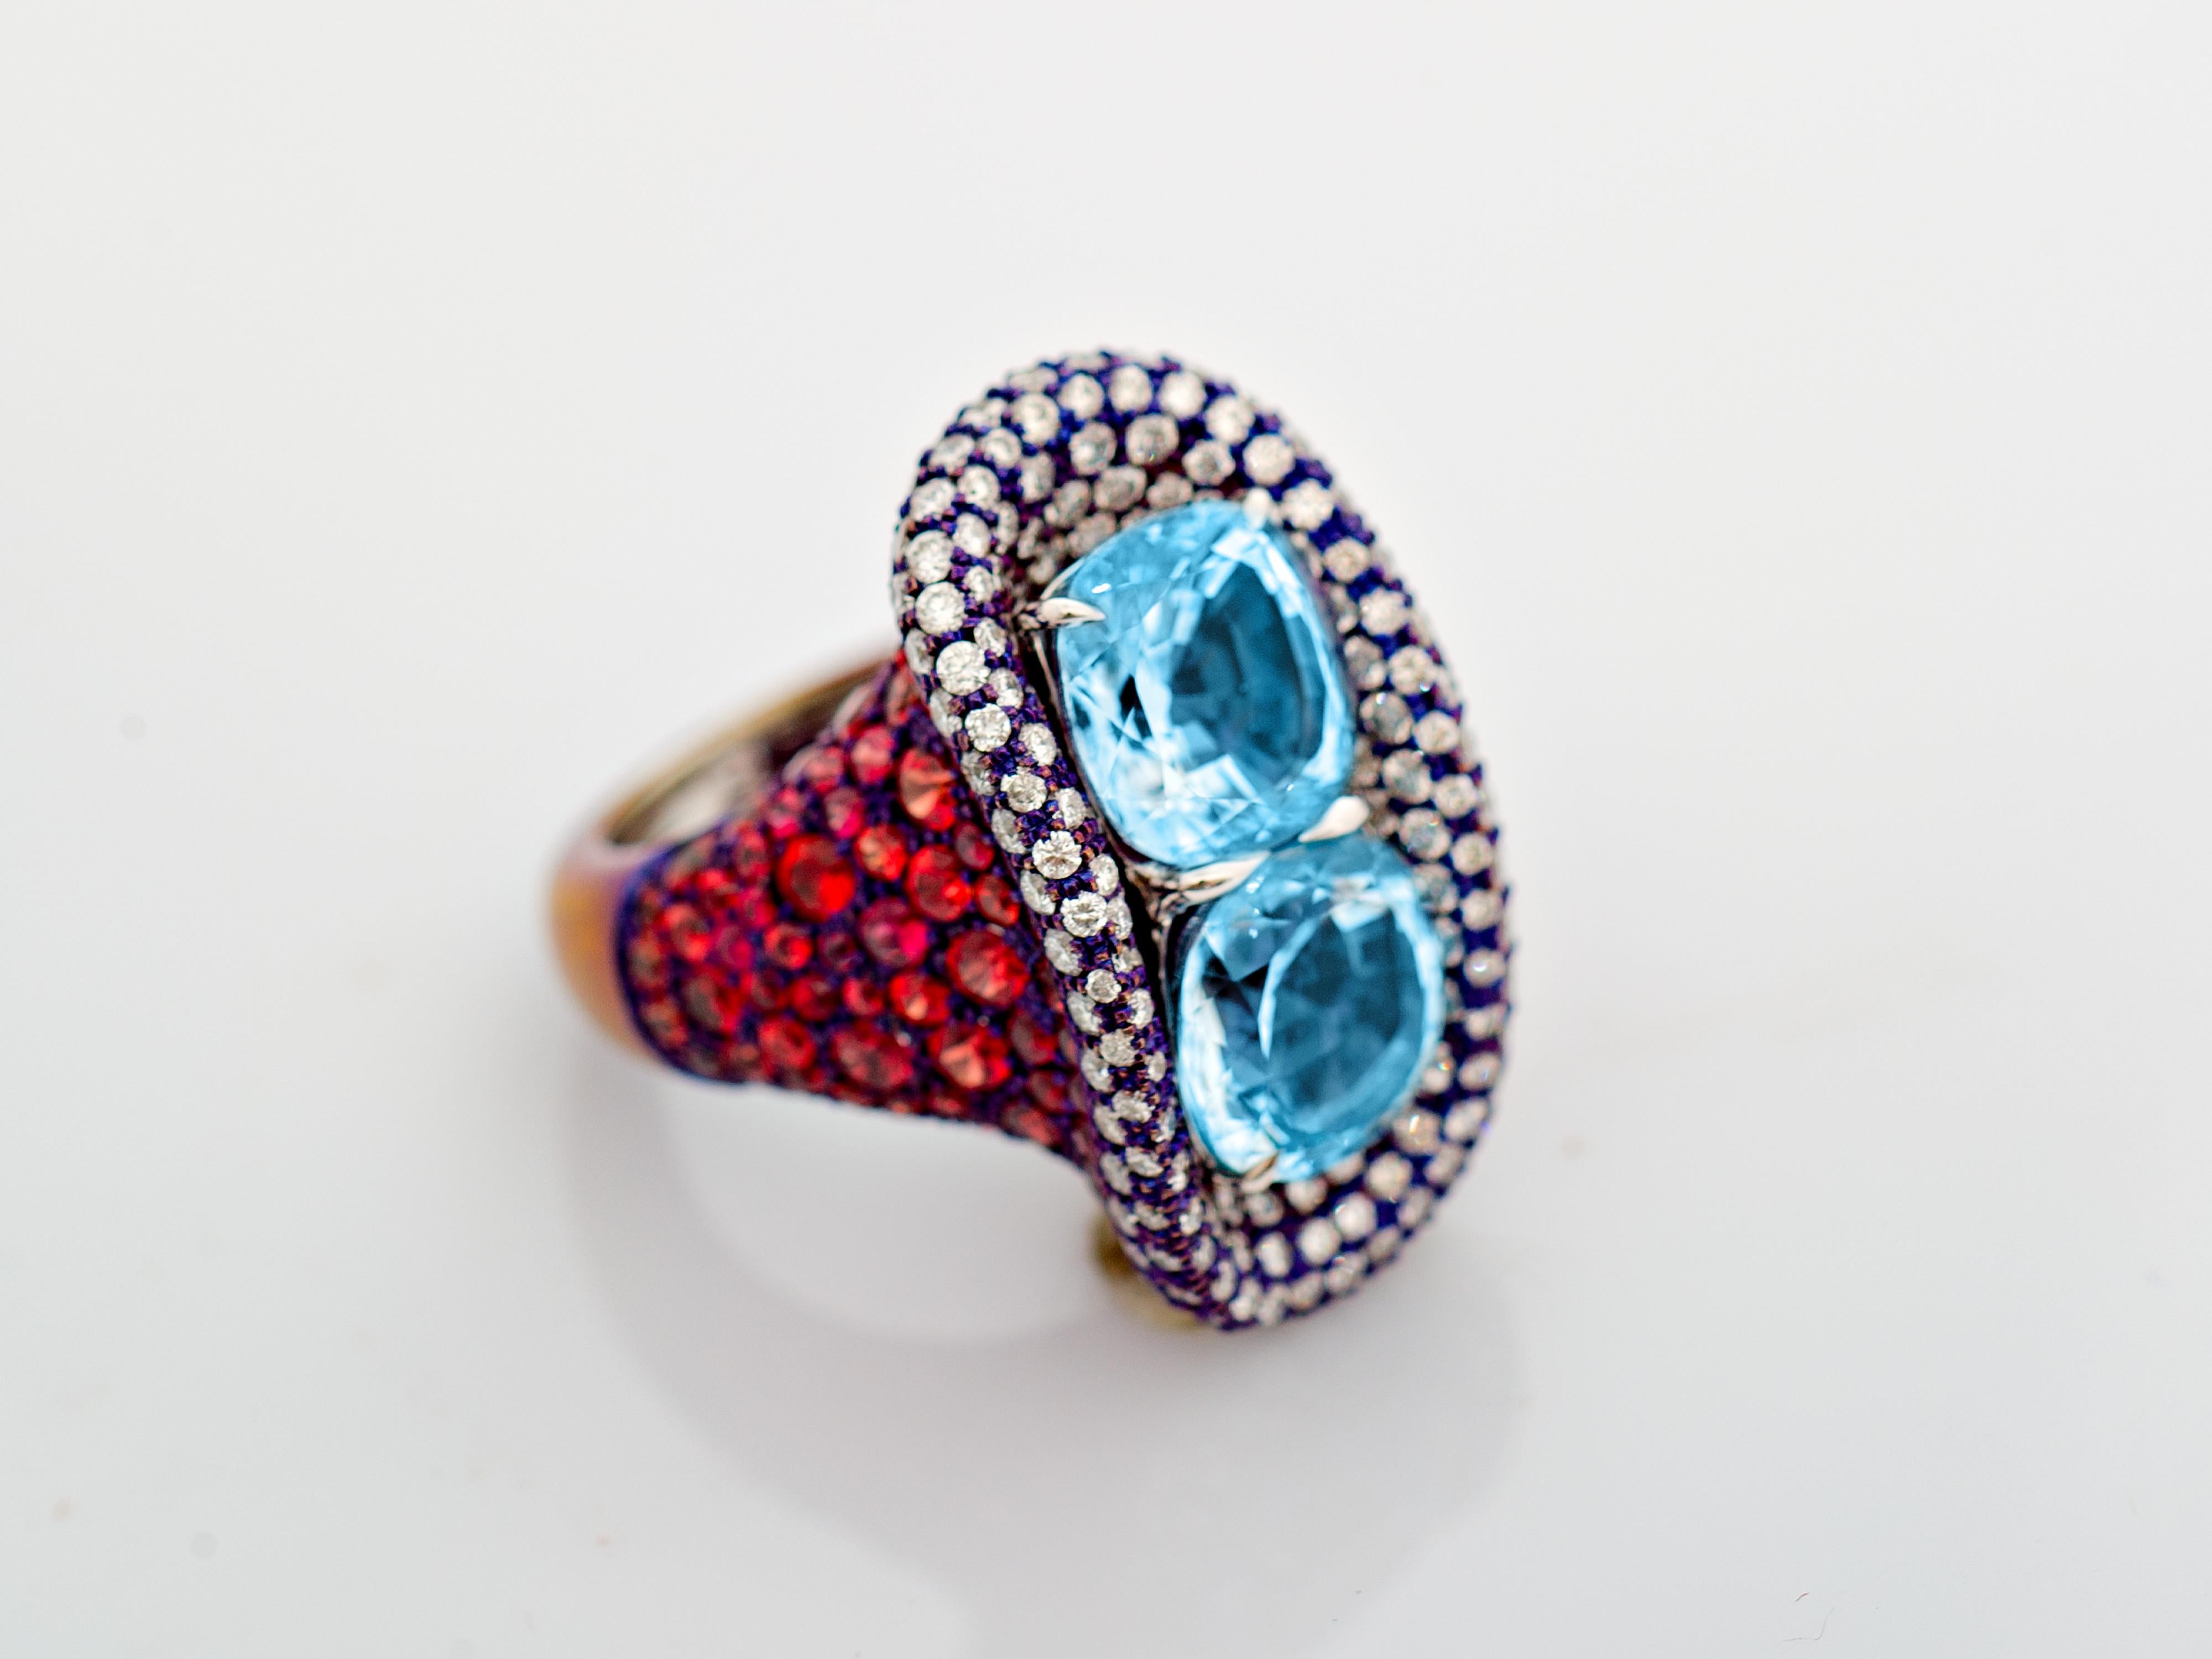 A carefully crafted titanium ring with two 10.27ct Blue Topaz stones set on the top, surrounded by 203 white diamonds along with 158 orange sapphires covering the lower aspect of the ring. A unique bold ring for a confident individual.